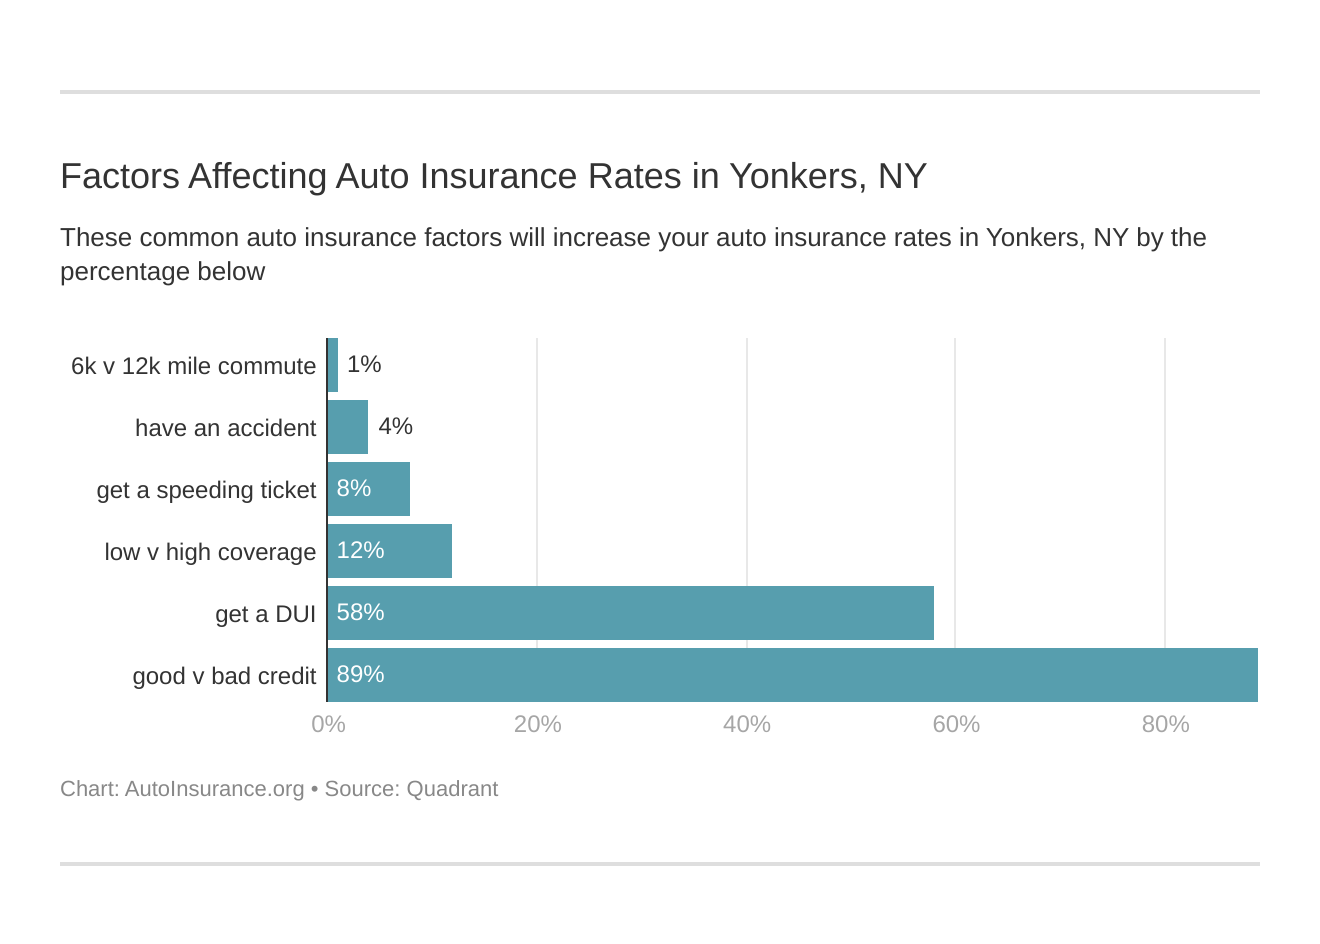 Factors Affecting Auto Insurance Rates in Yonkers, NY